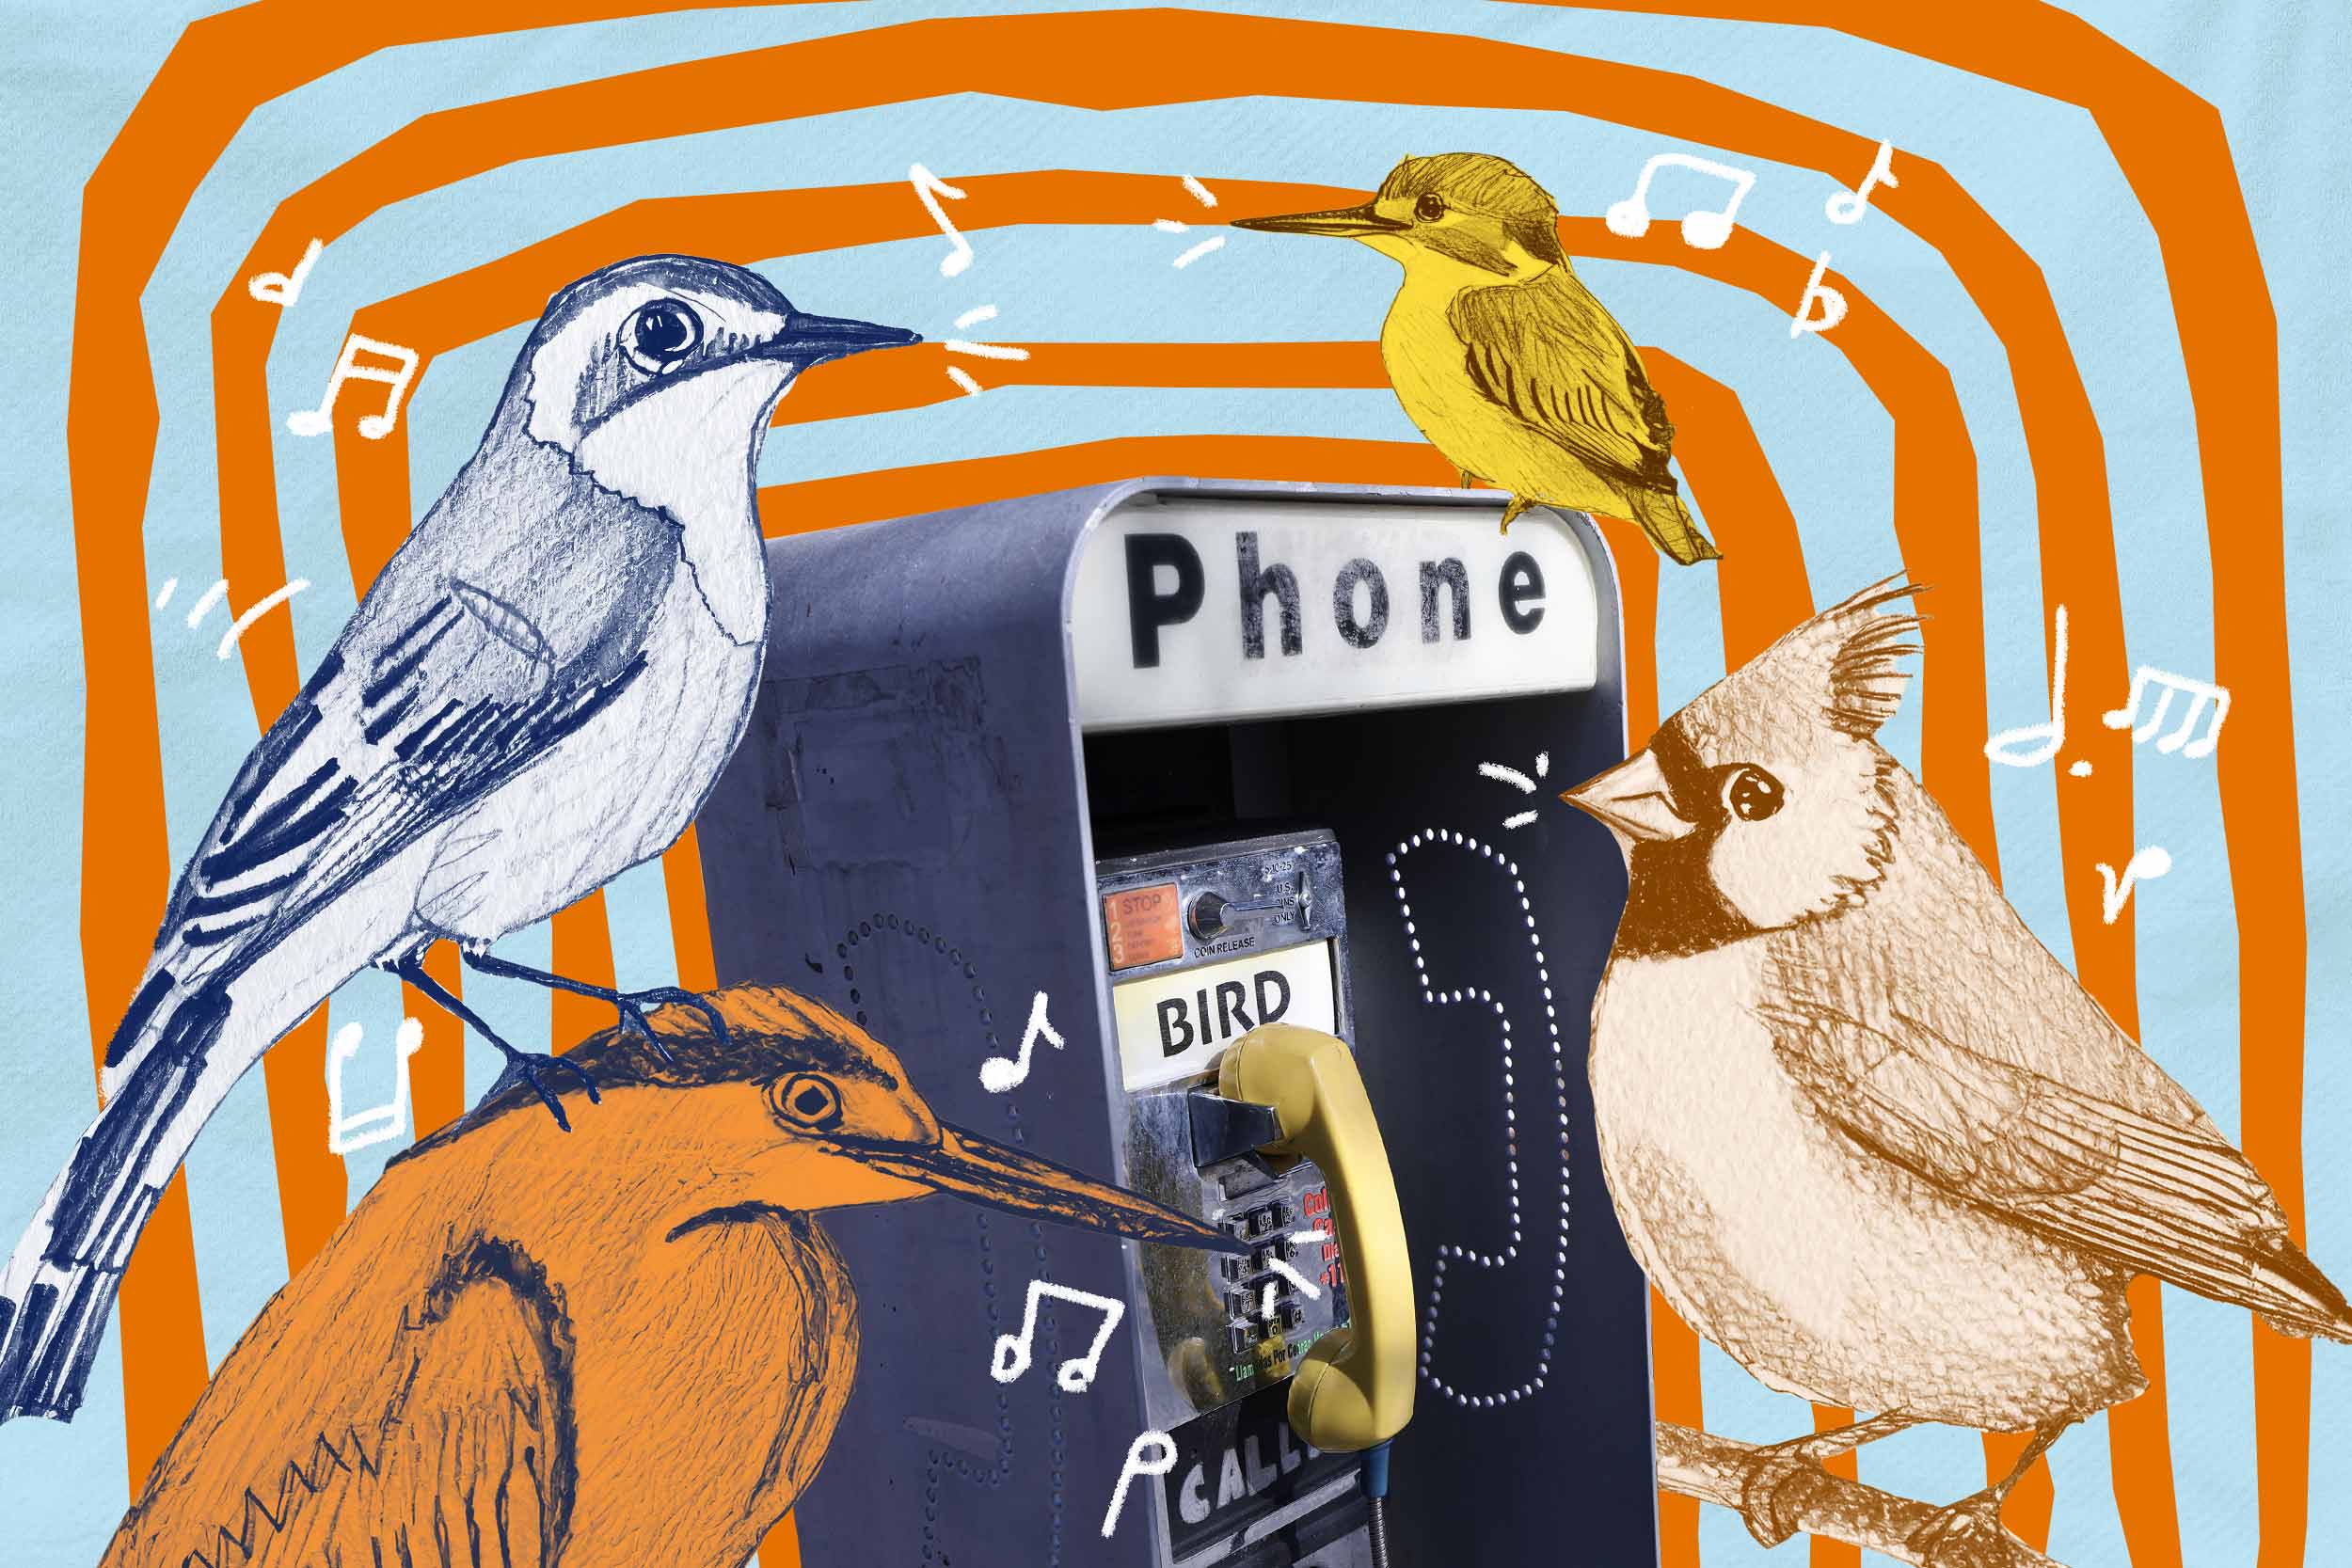 An illustration of 4 different birds sitting around a payphone, surrounded by music notes.